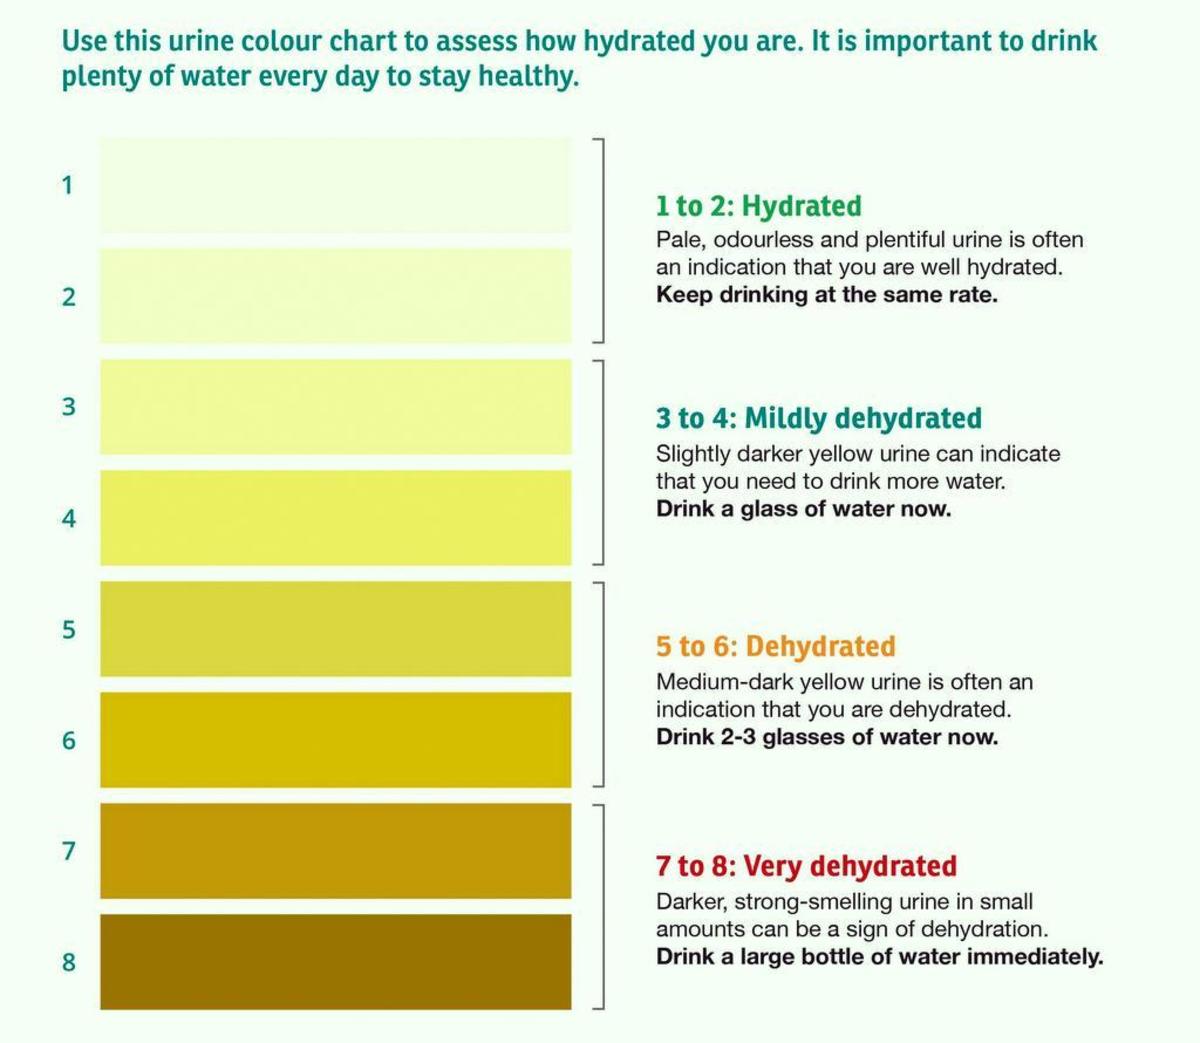 Urine color chart - Use this as a guide only and should not replace the advice of medical personnel.